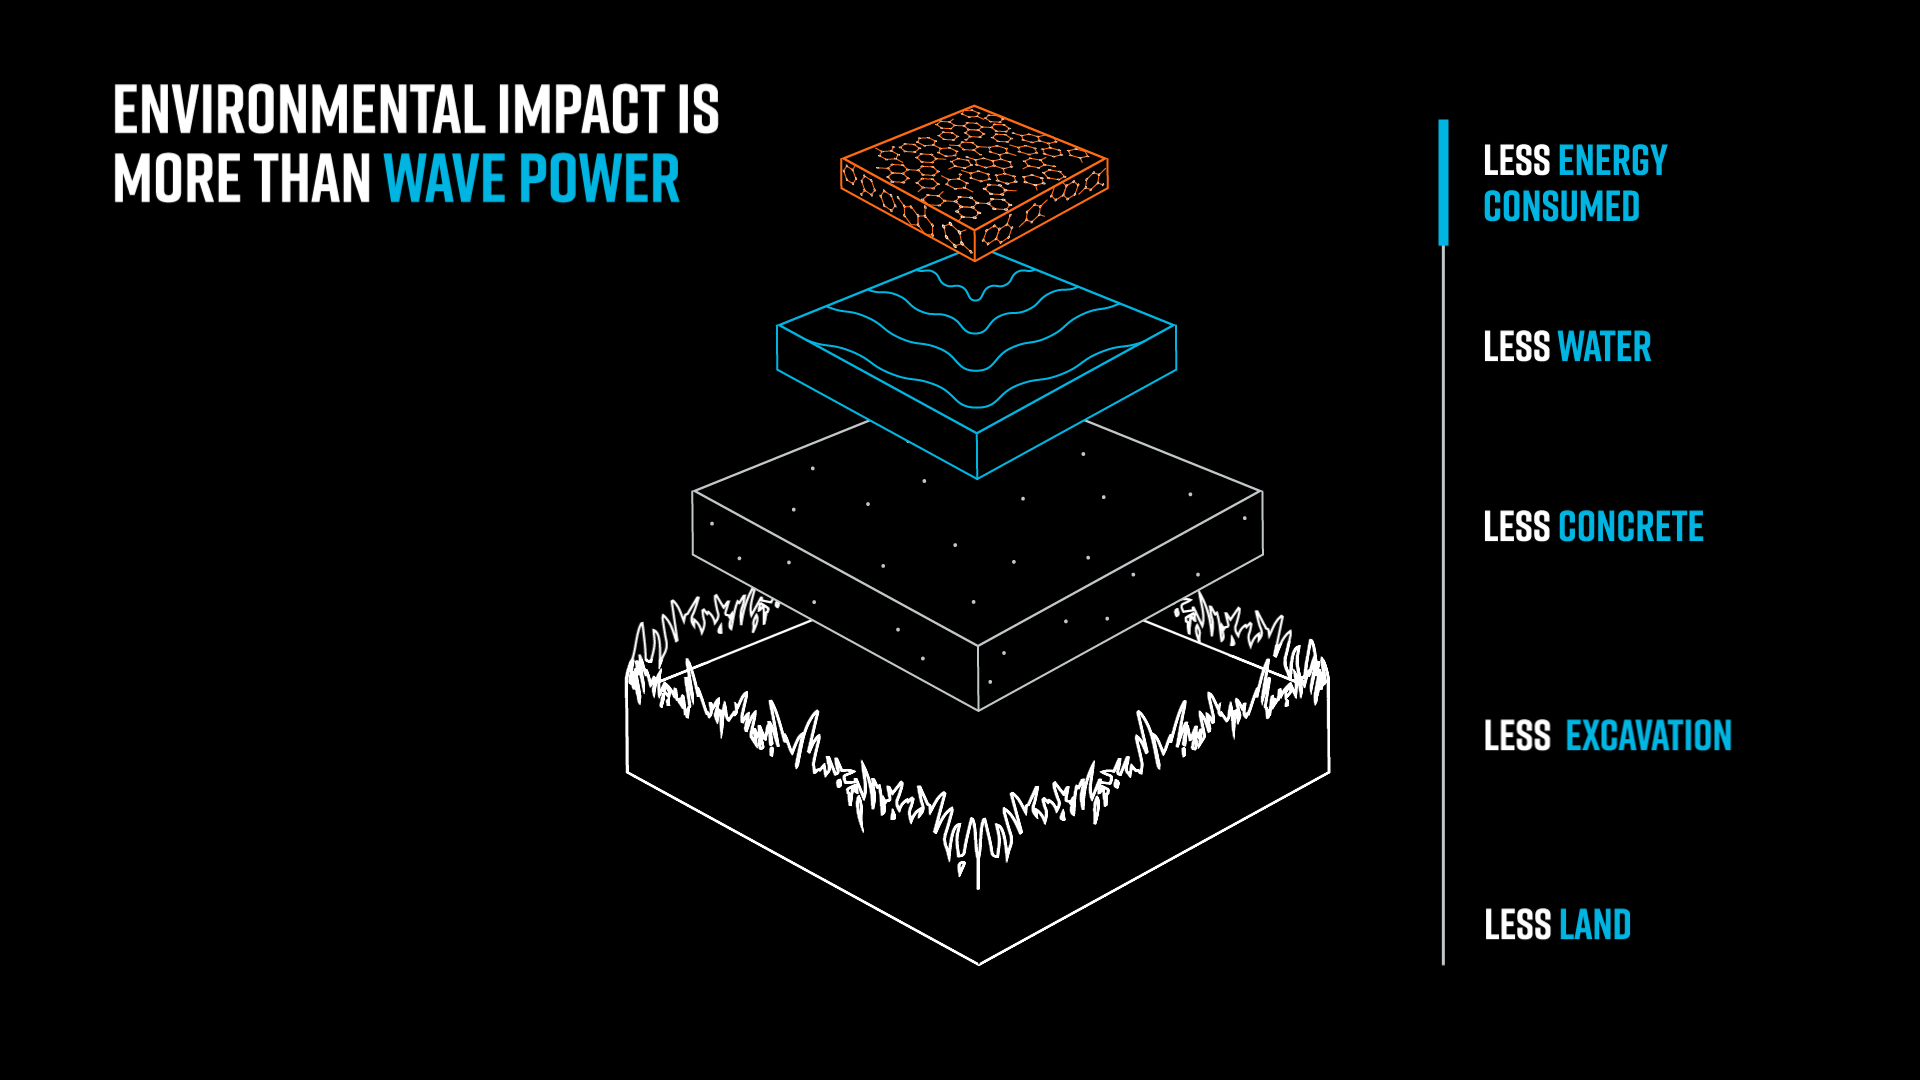 Wave pool/surf park infographic showing environmental impact of Endless Surf